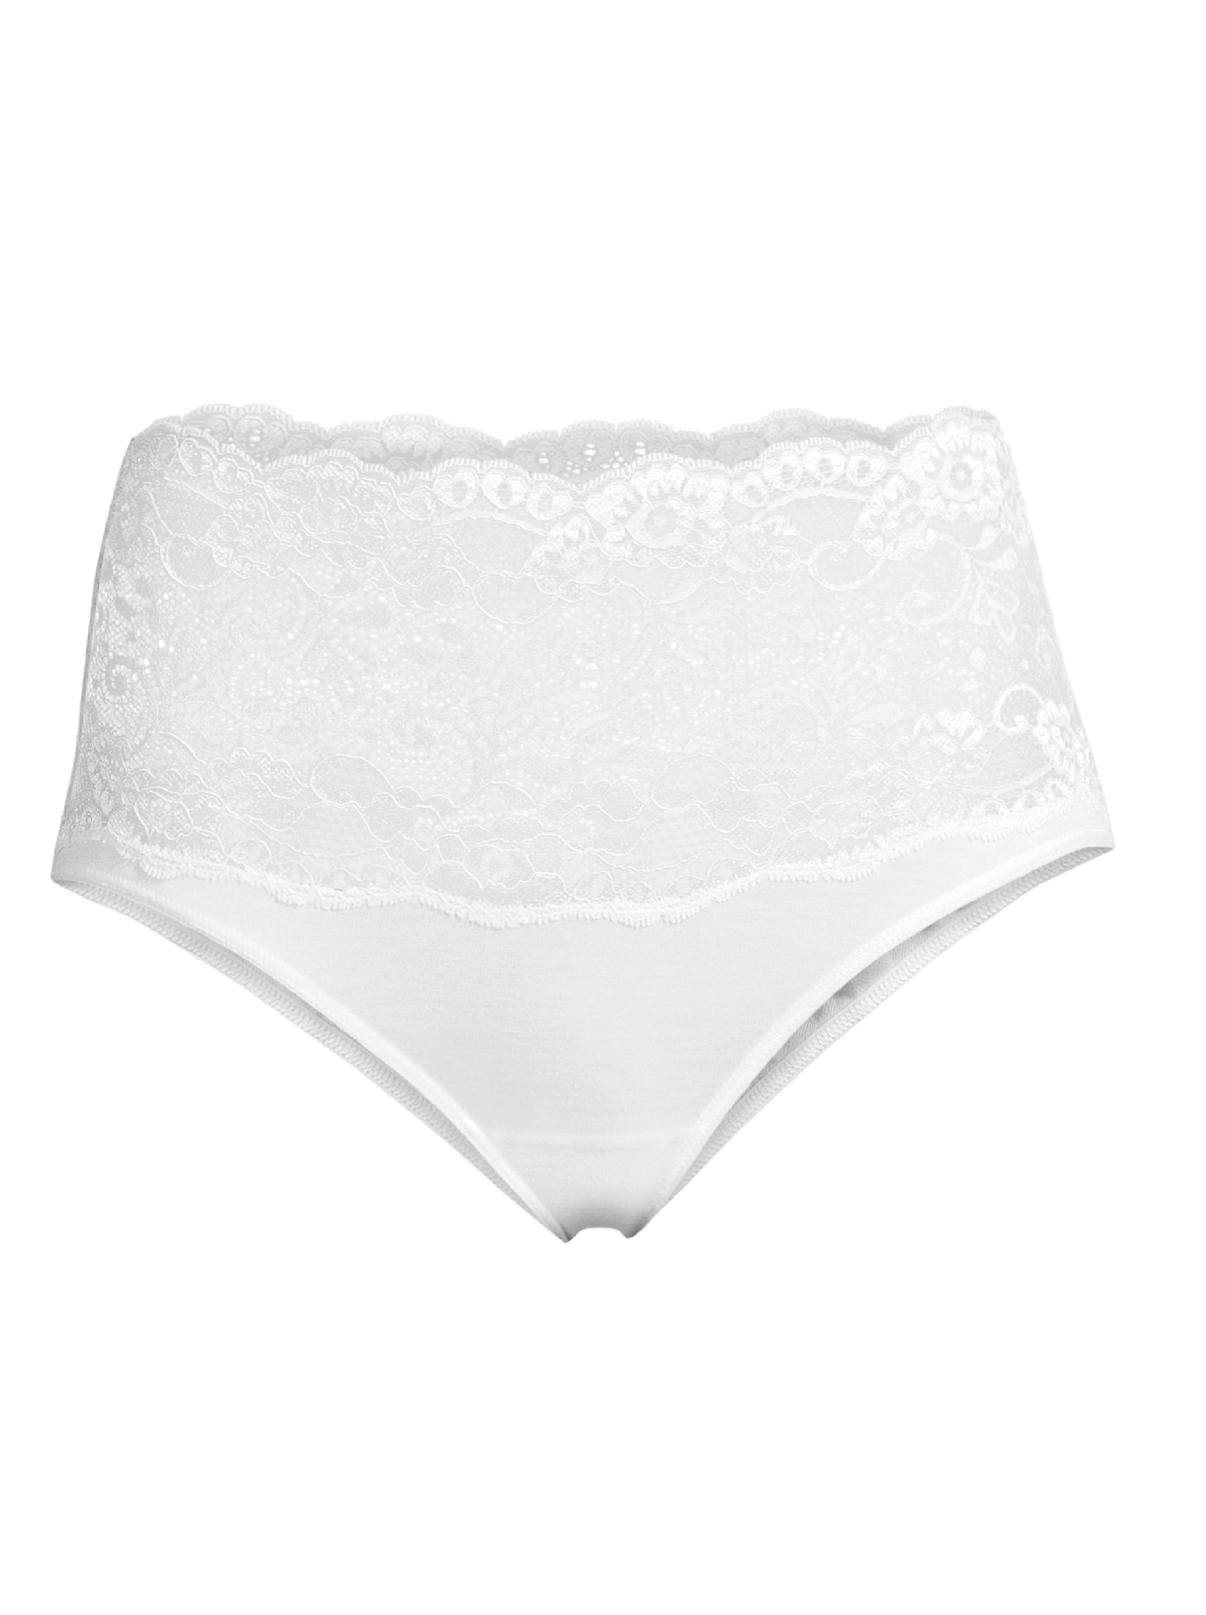 Woman white briefs in cotton with leavers lace